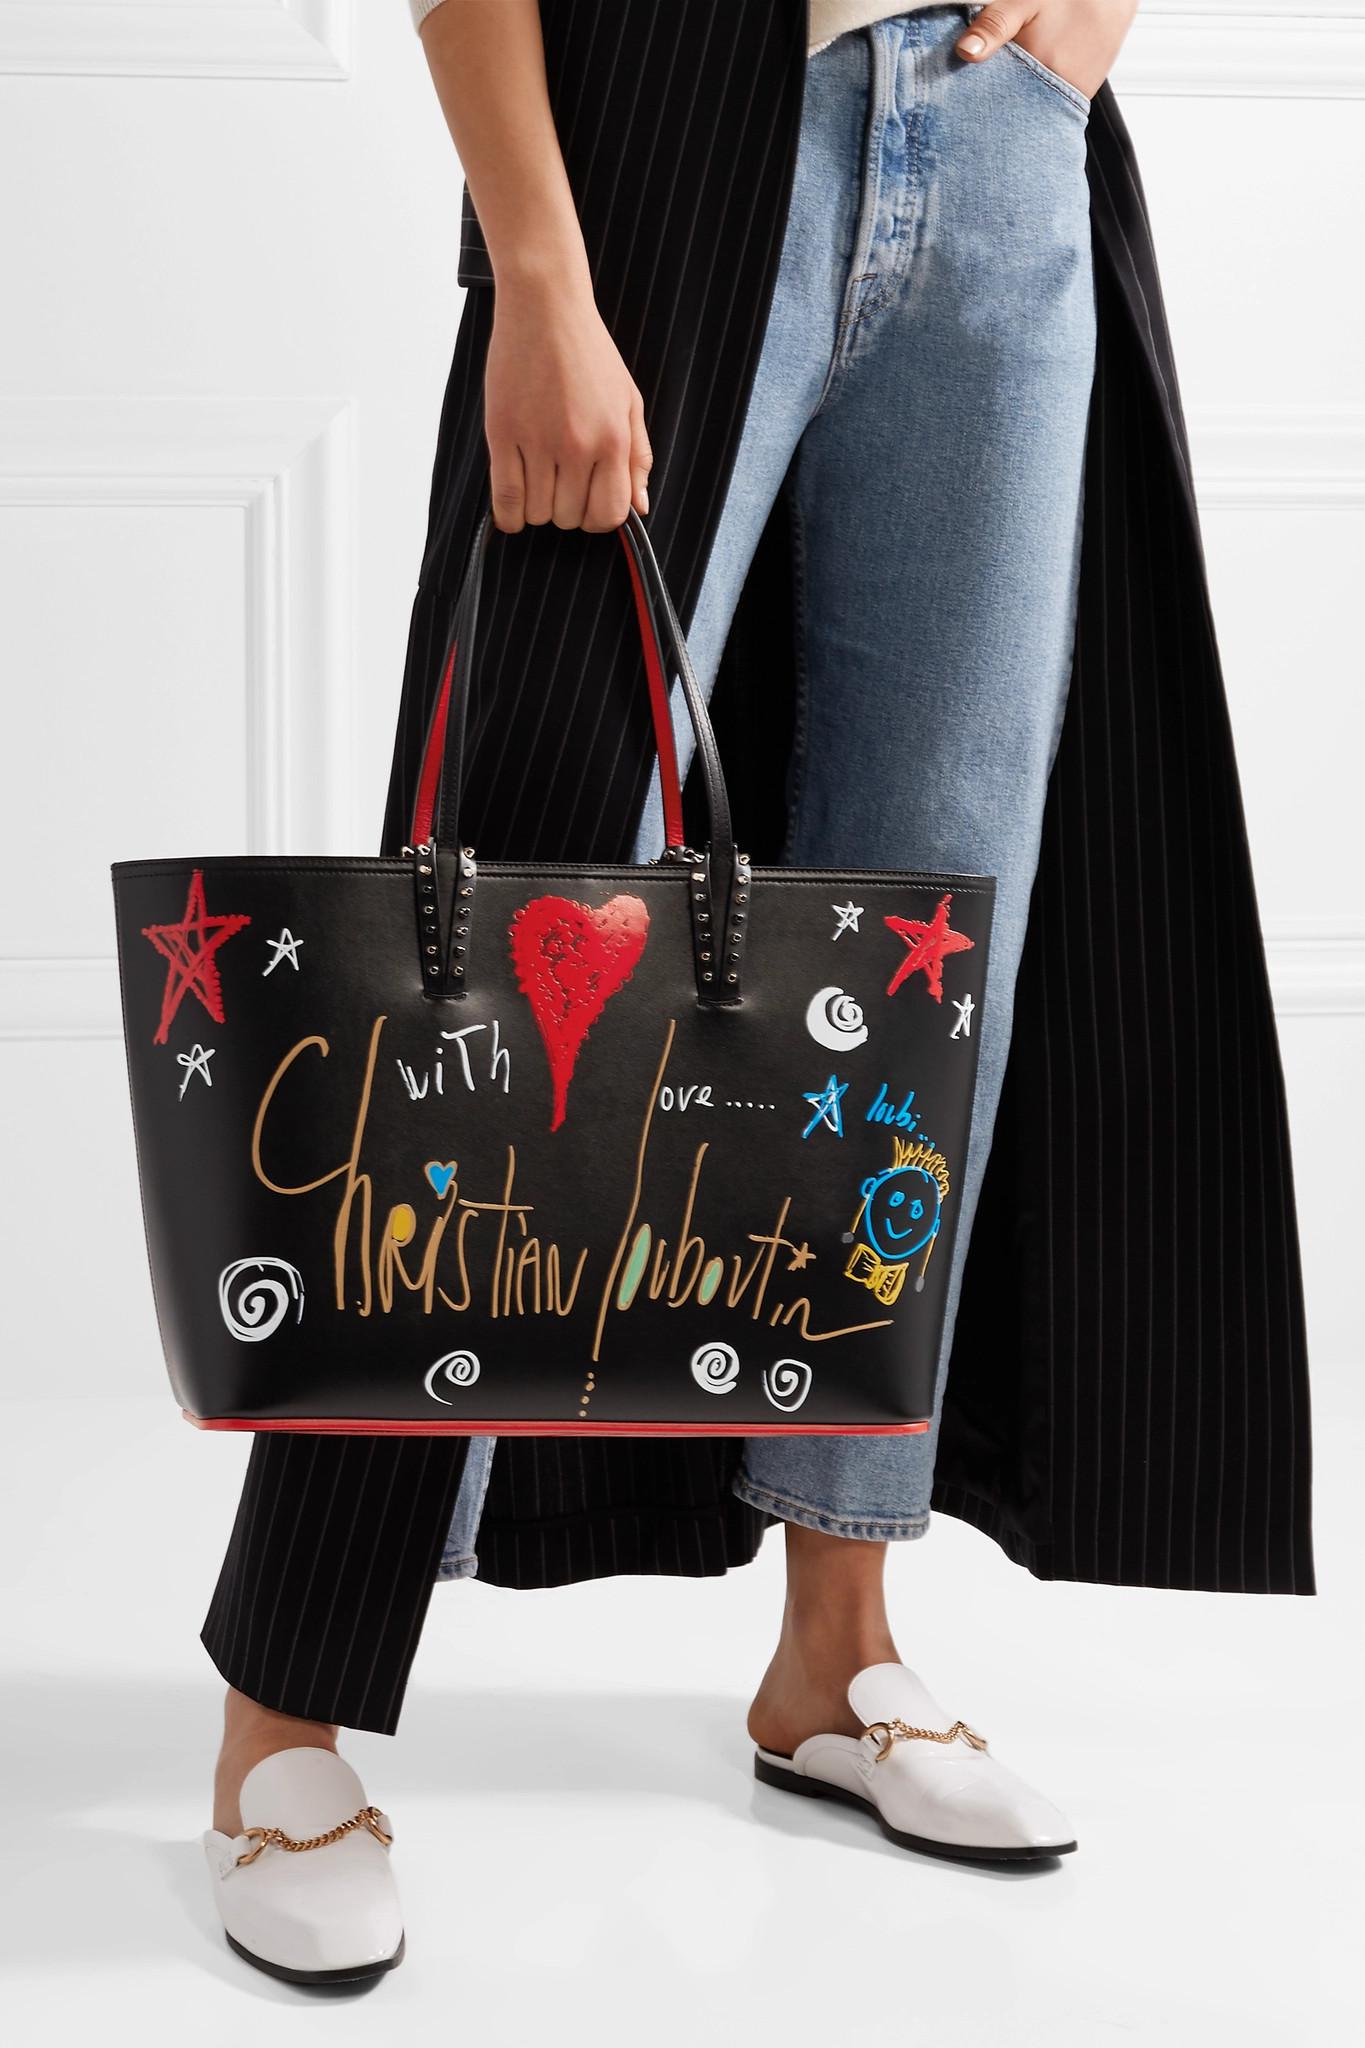 Lyst - Christian Louboutin Cabata Spiked Printed Leather Tote in Black